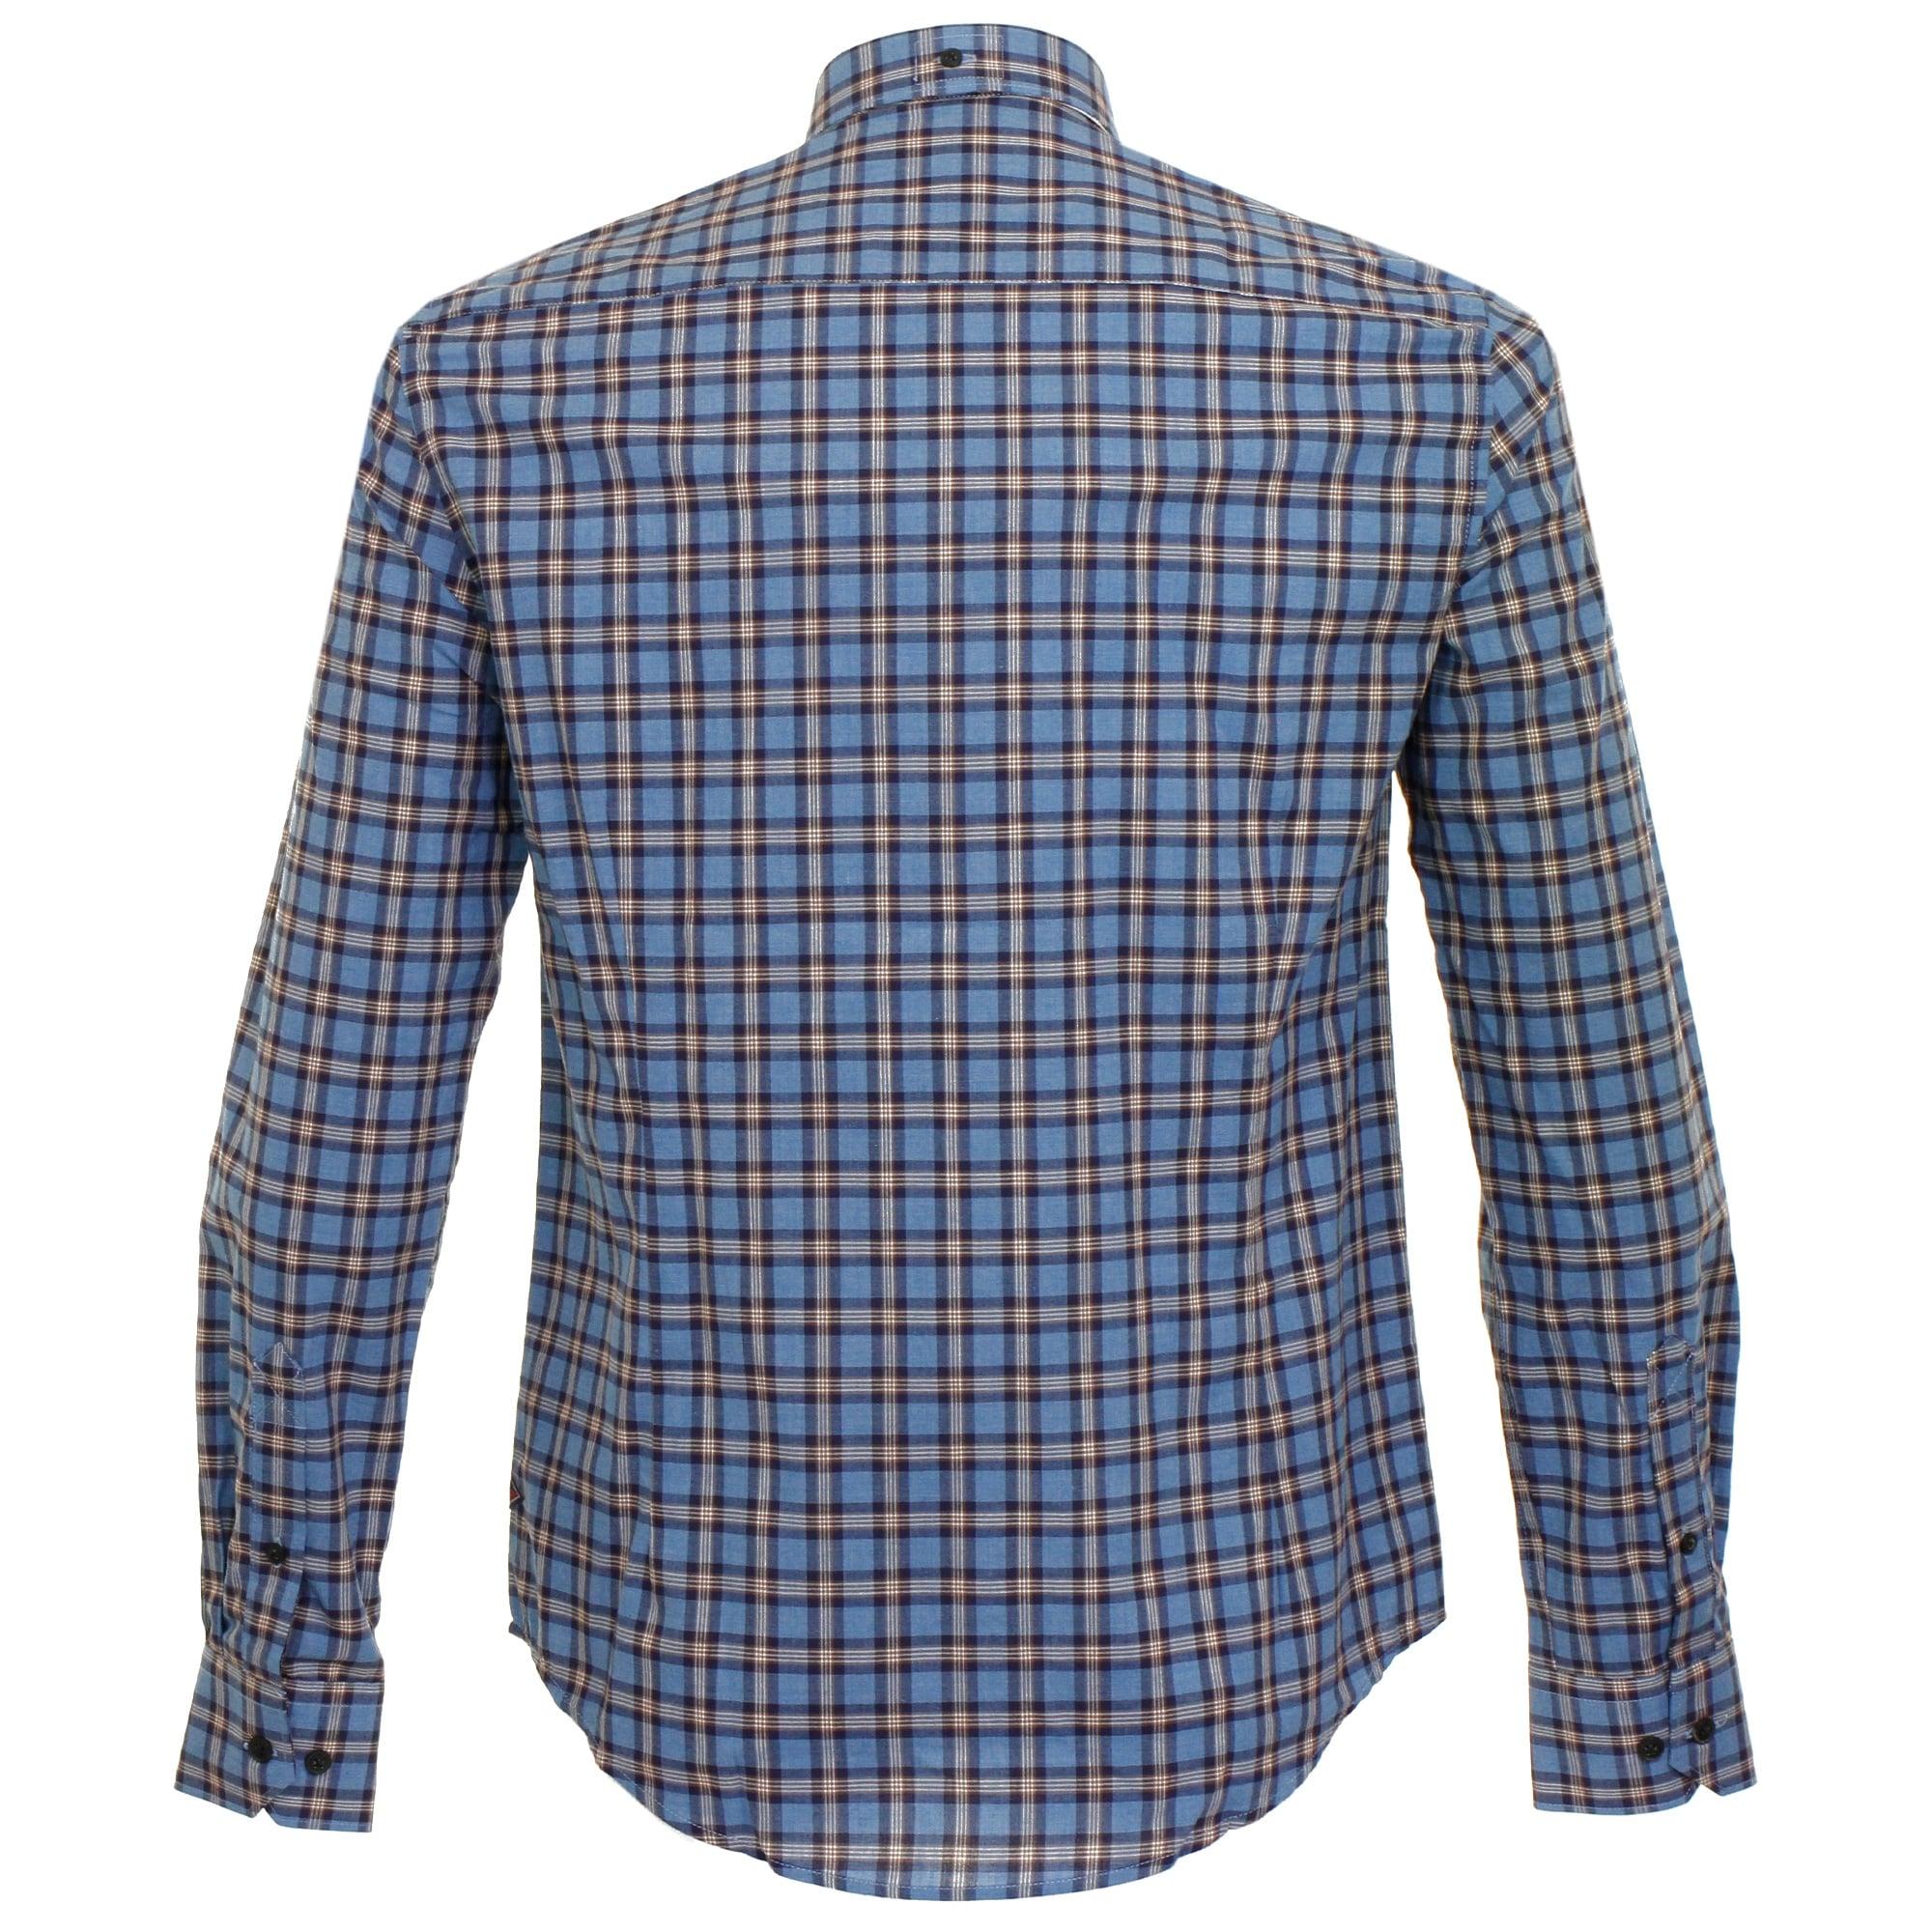 Lyst - Barbour Barbour International Hero Chambray Check Shirt ...